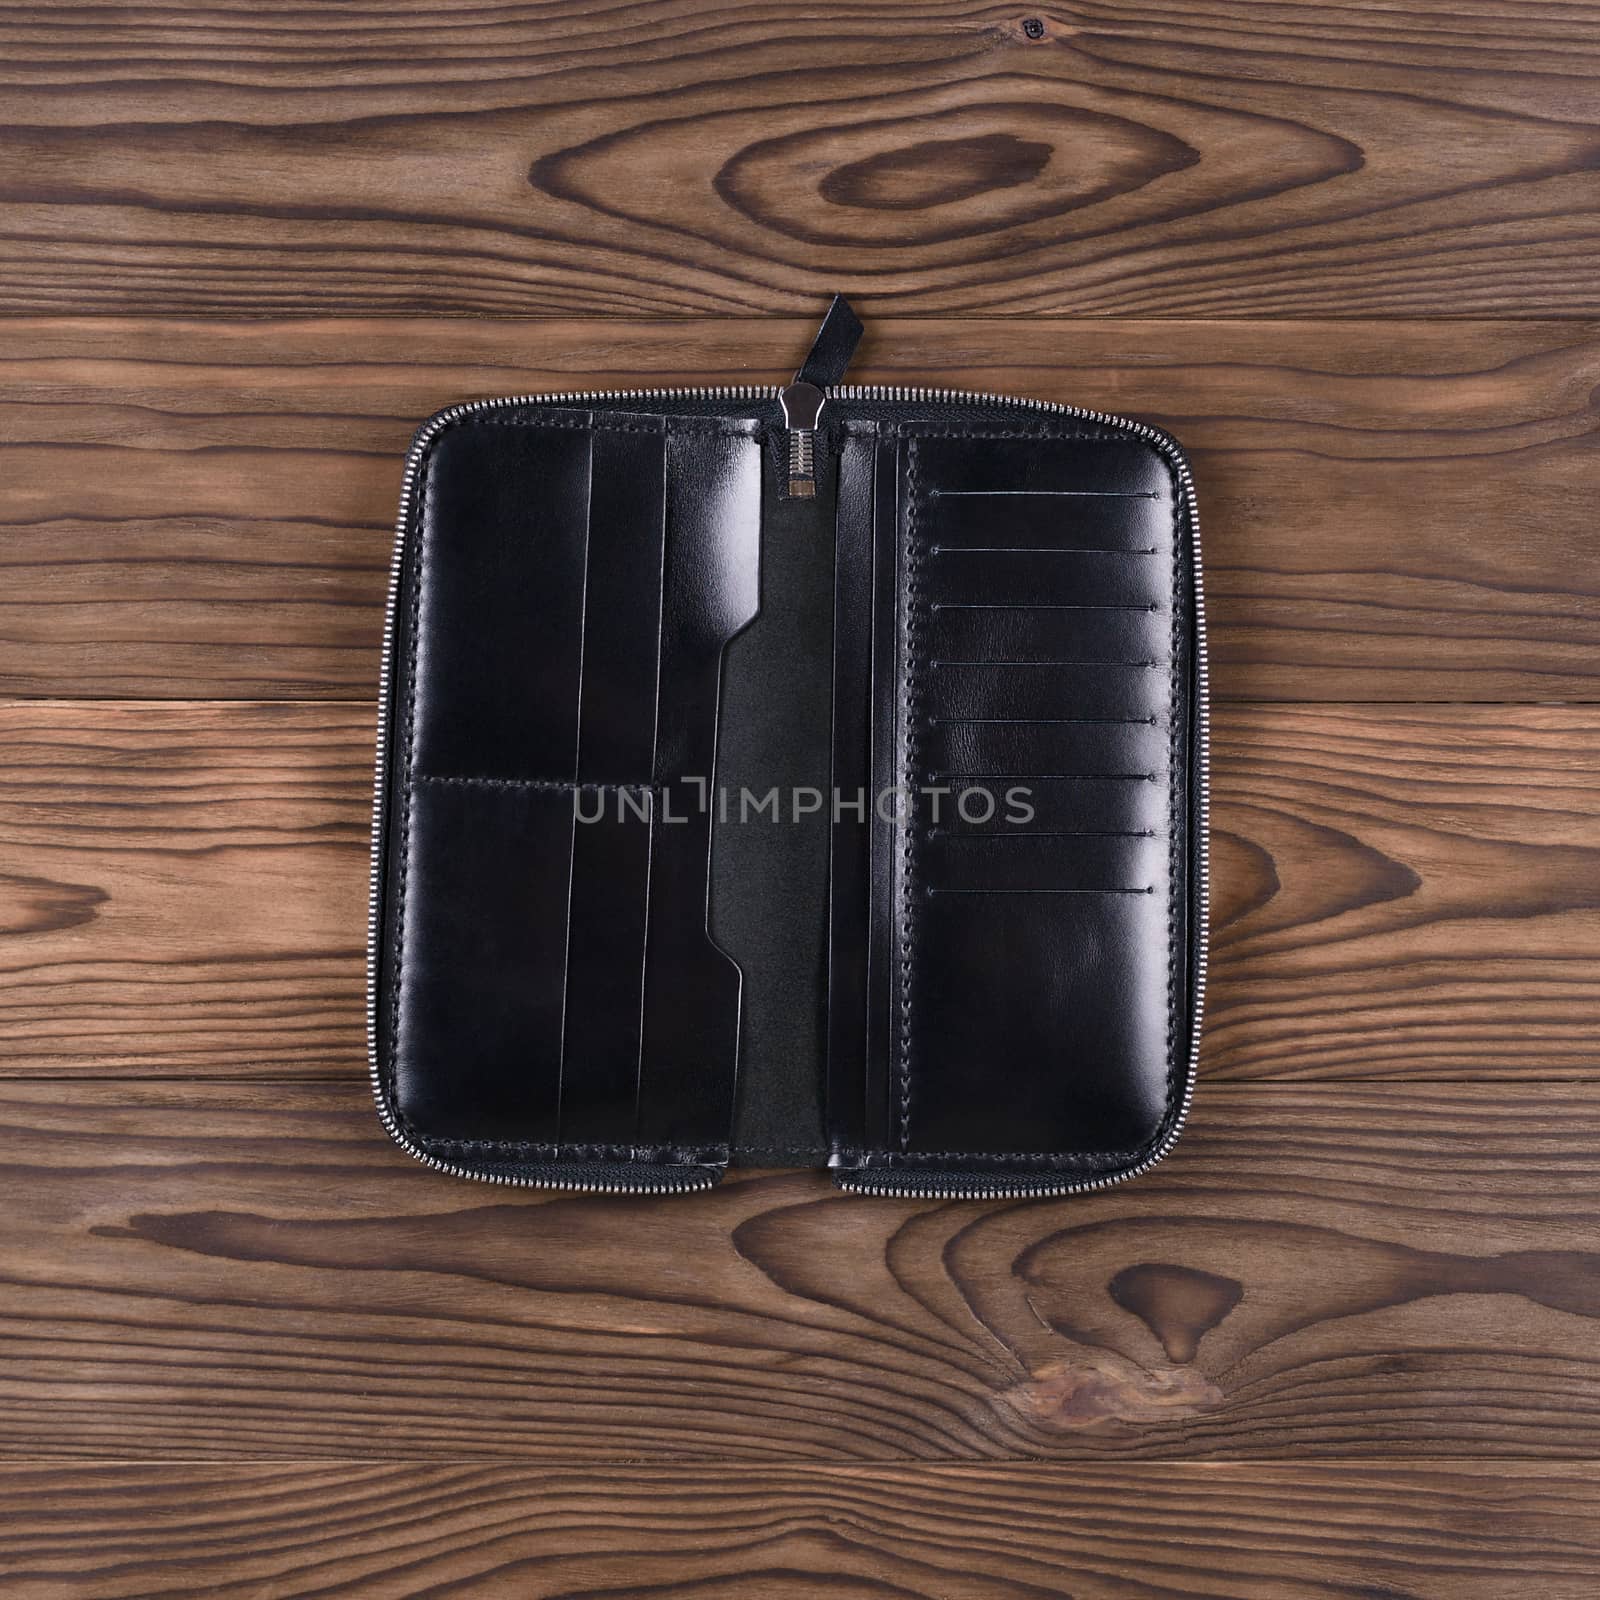 Gloss black color handmade leather porte-monnaie on wooden textured background. Oper purse. Up to down view. Stock photo of luxury accessories.